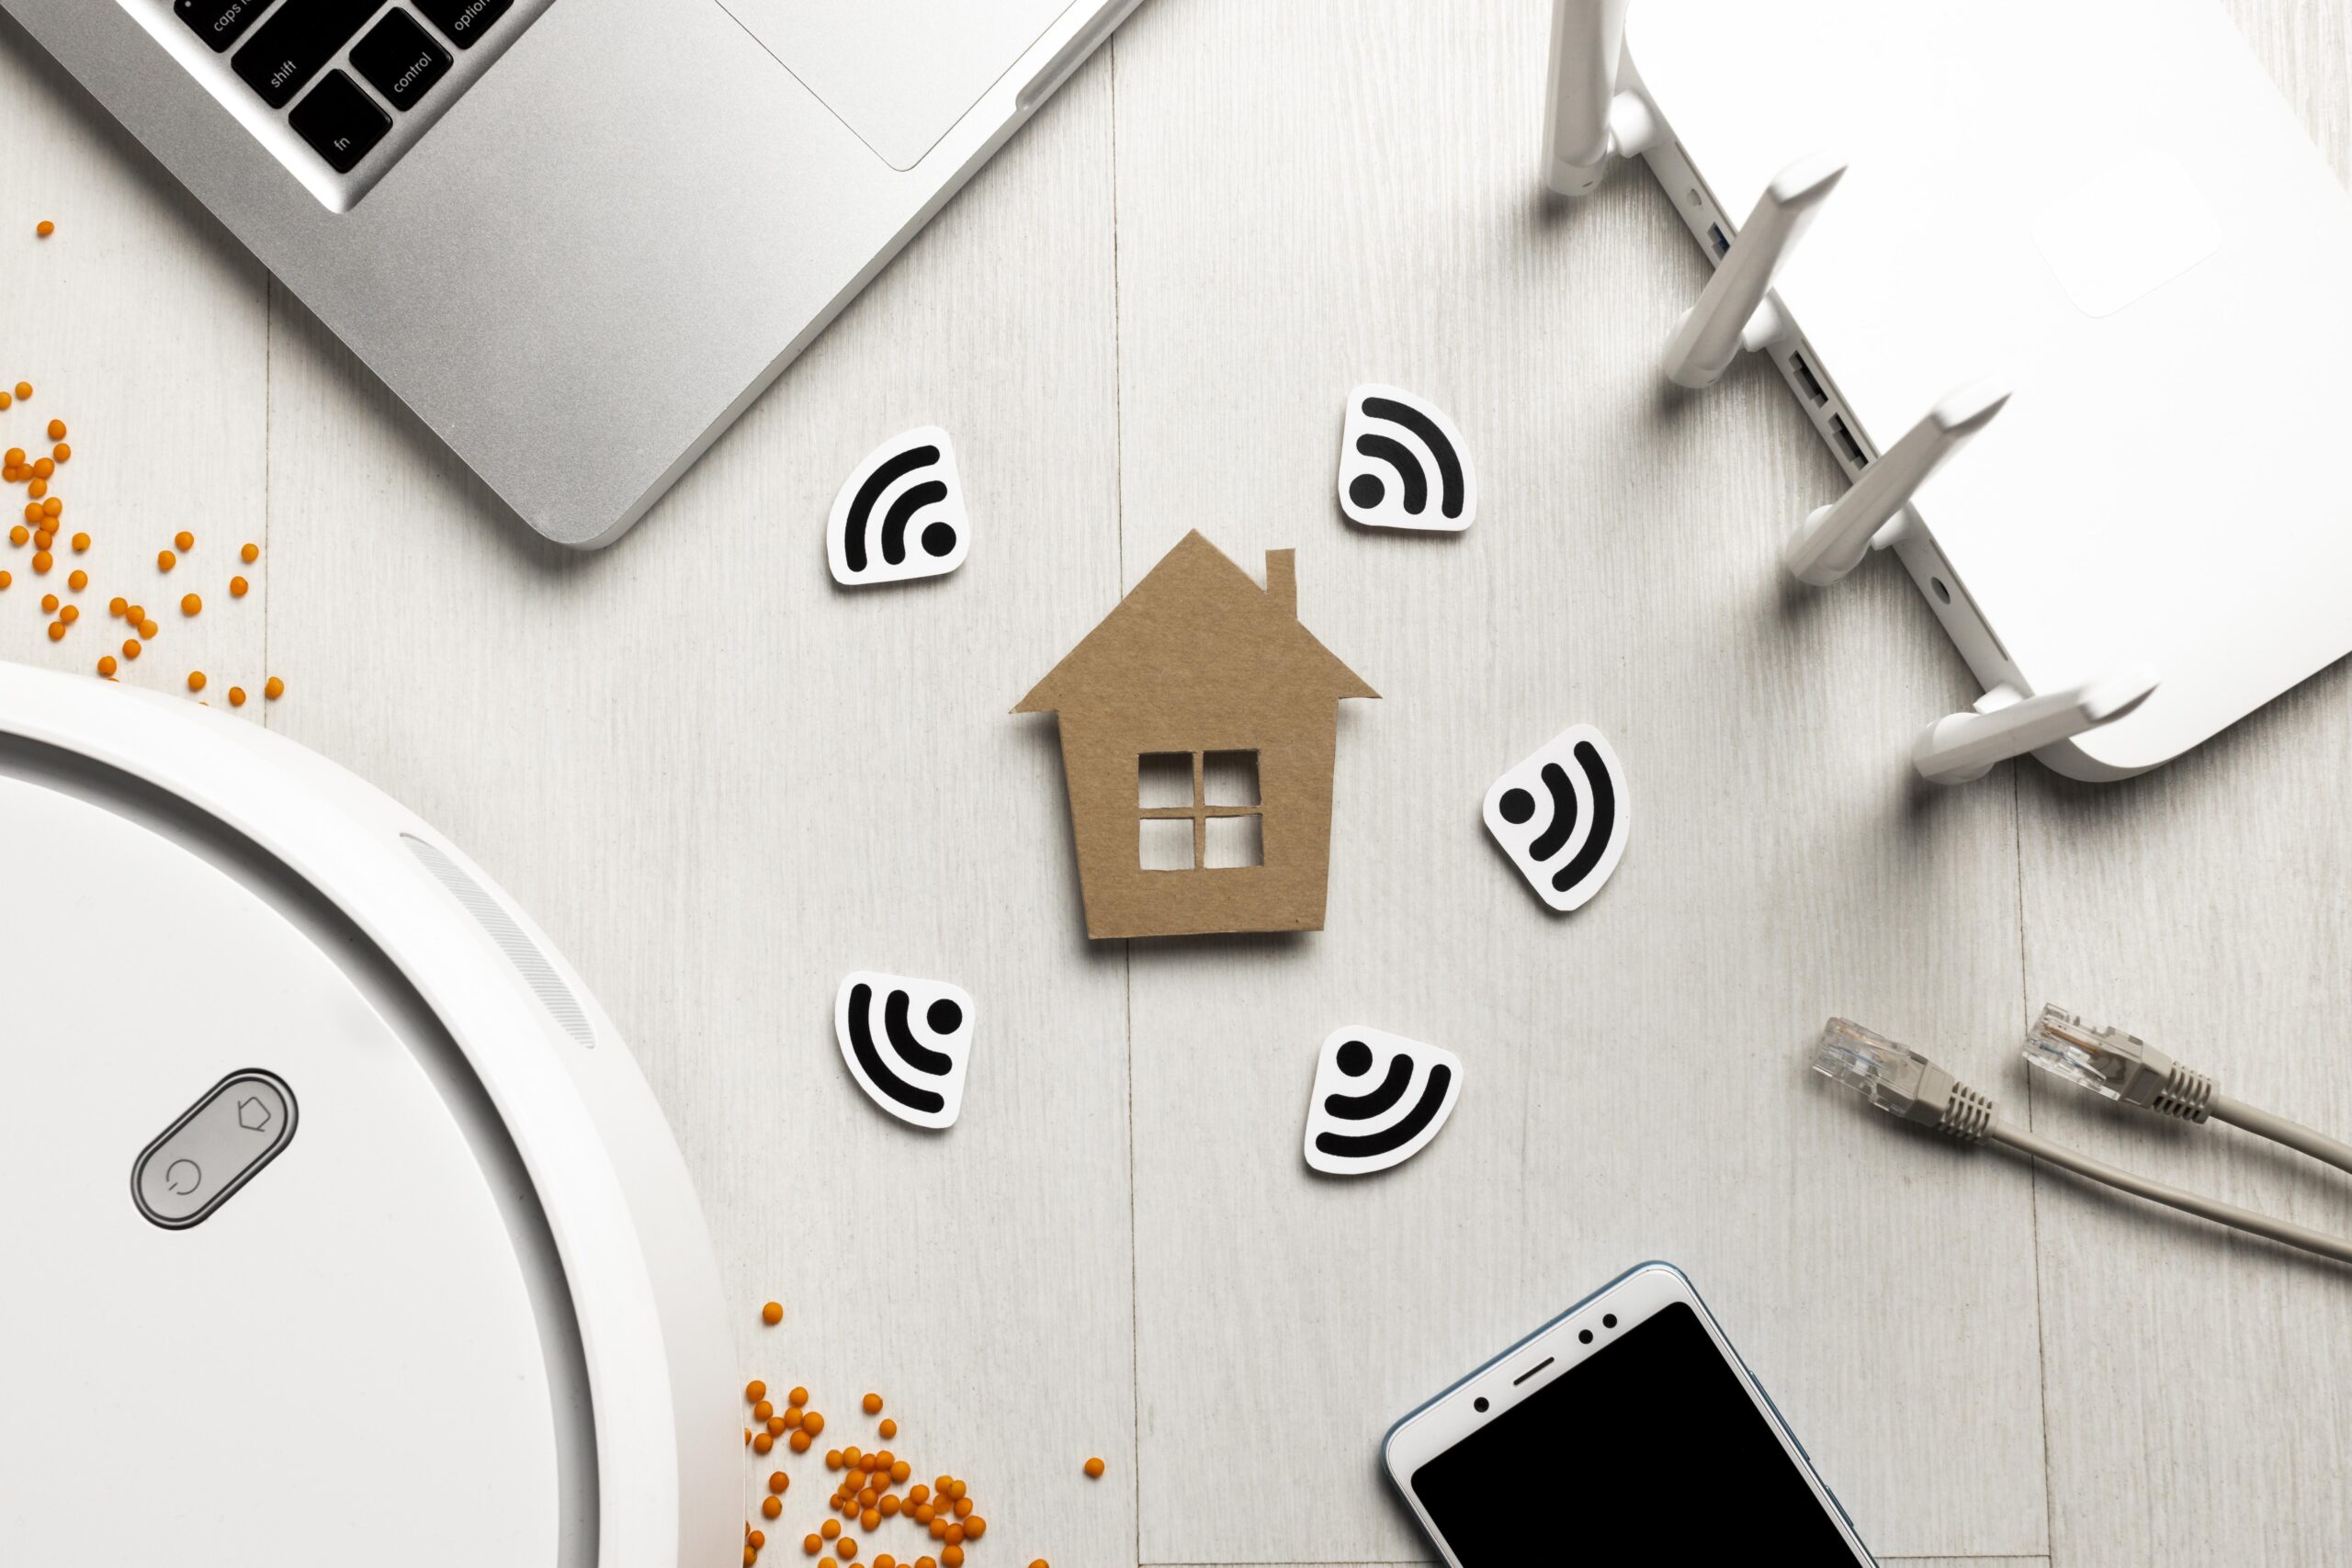 How a good broadband connection makes your home life easier